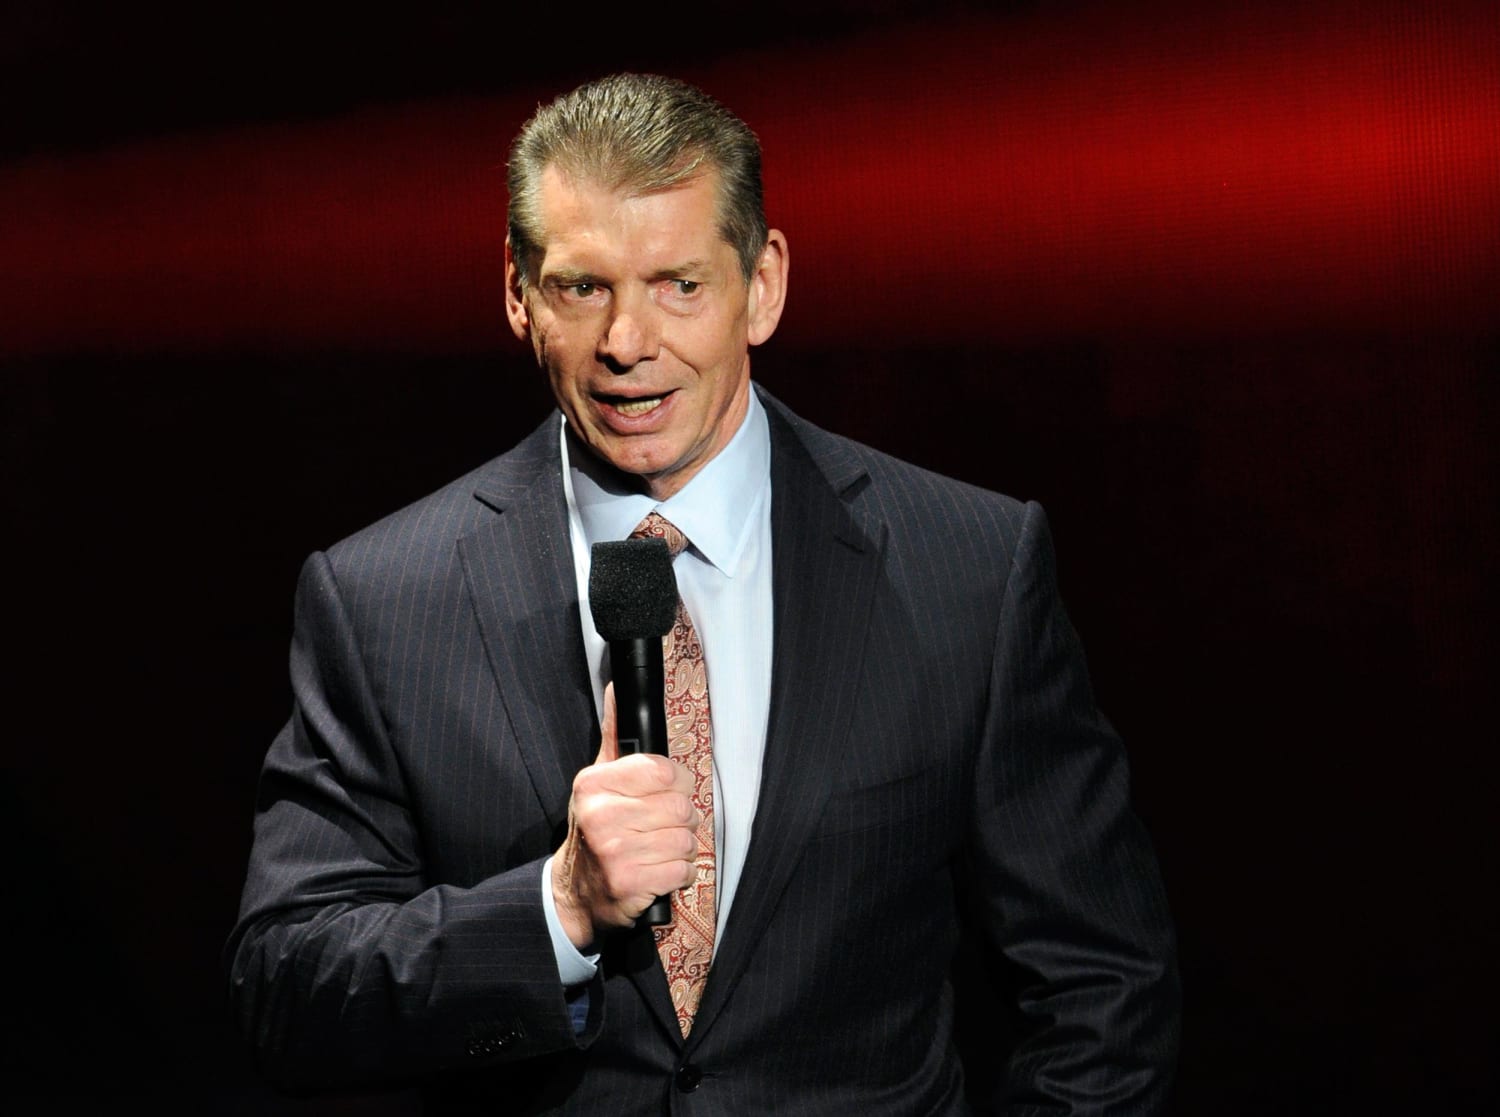 WWE boss Vince McMahon hit with federal grand jury subpoena and search warrant, company reveals